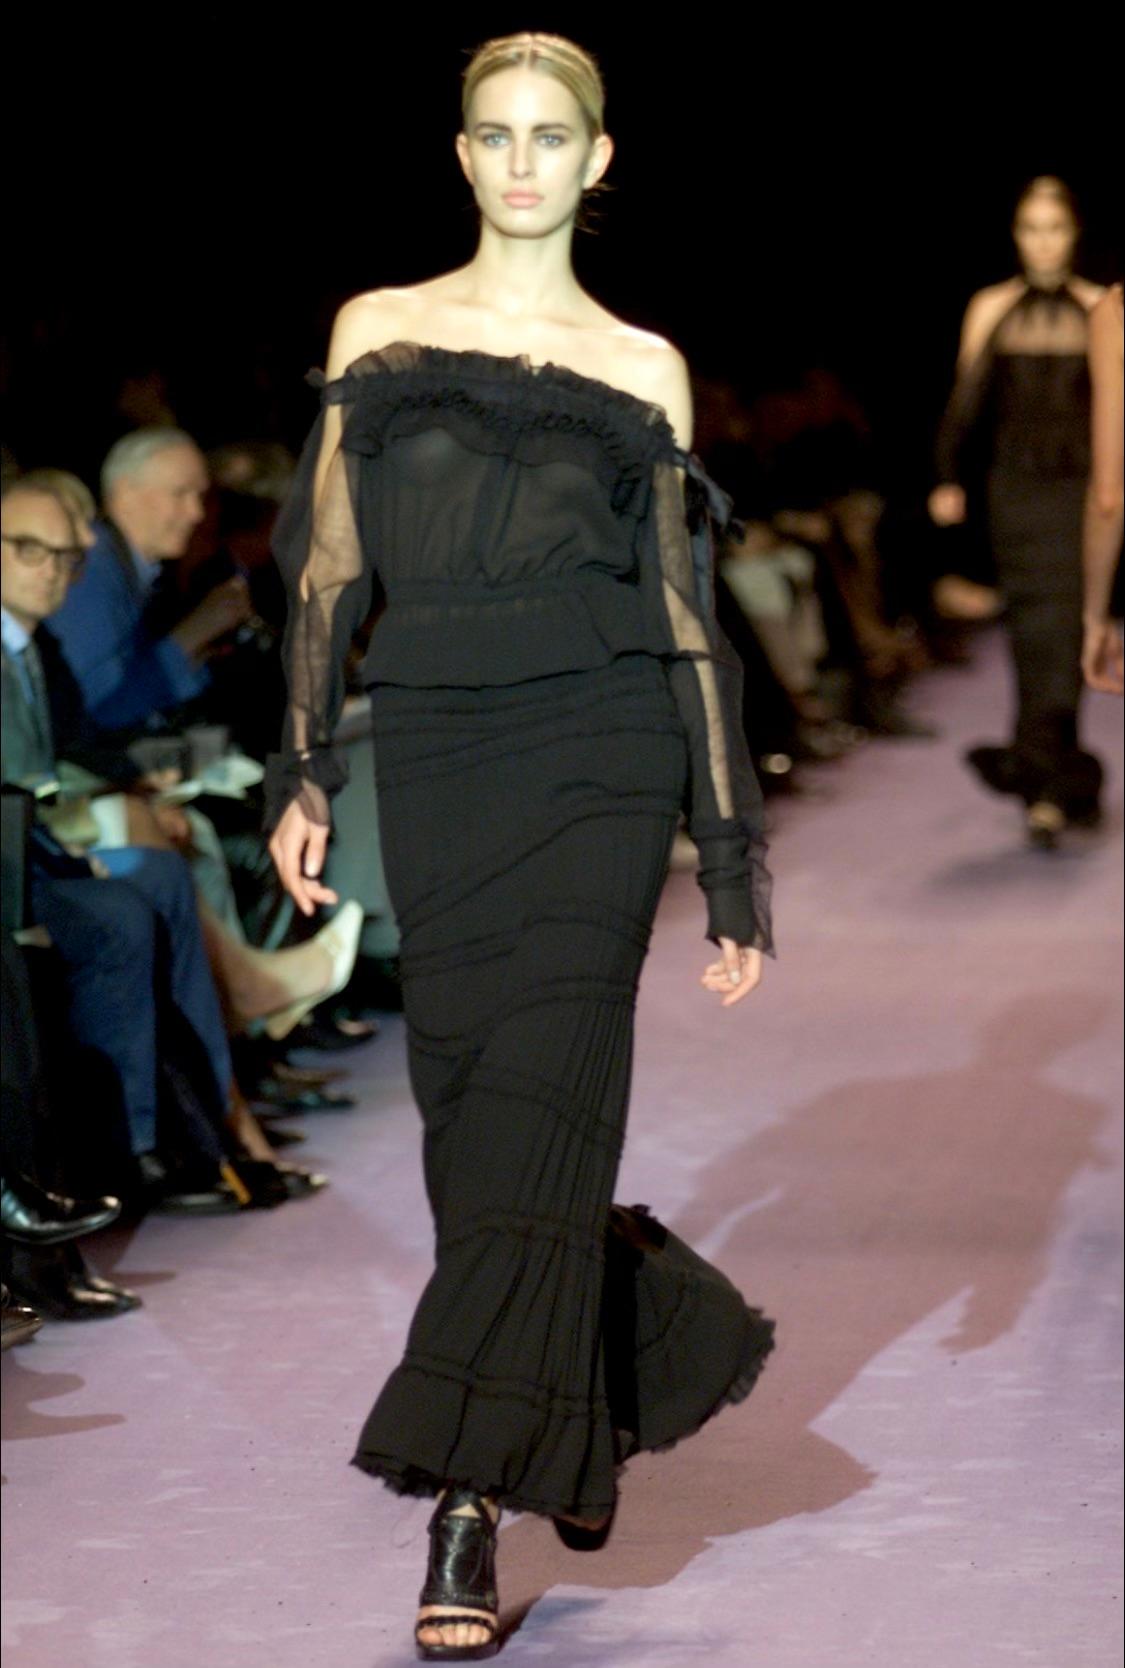 Presenting a luxurious ruffle-trimmed maxi skirt designed by Tom Ford for Yves Saint Laurent Rive Gauche's Fall/Winter 2001 collection. This skirt debuted as part of Look 42 on Karolina Kurkova, and a blue version was featured on the September 2001